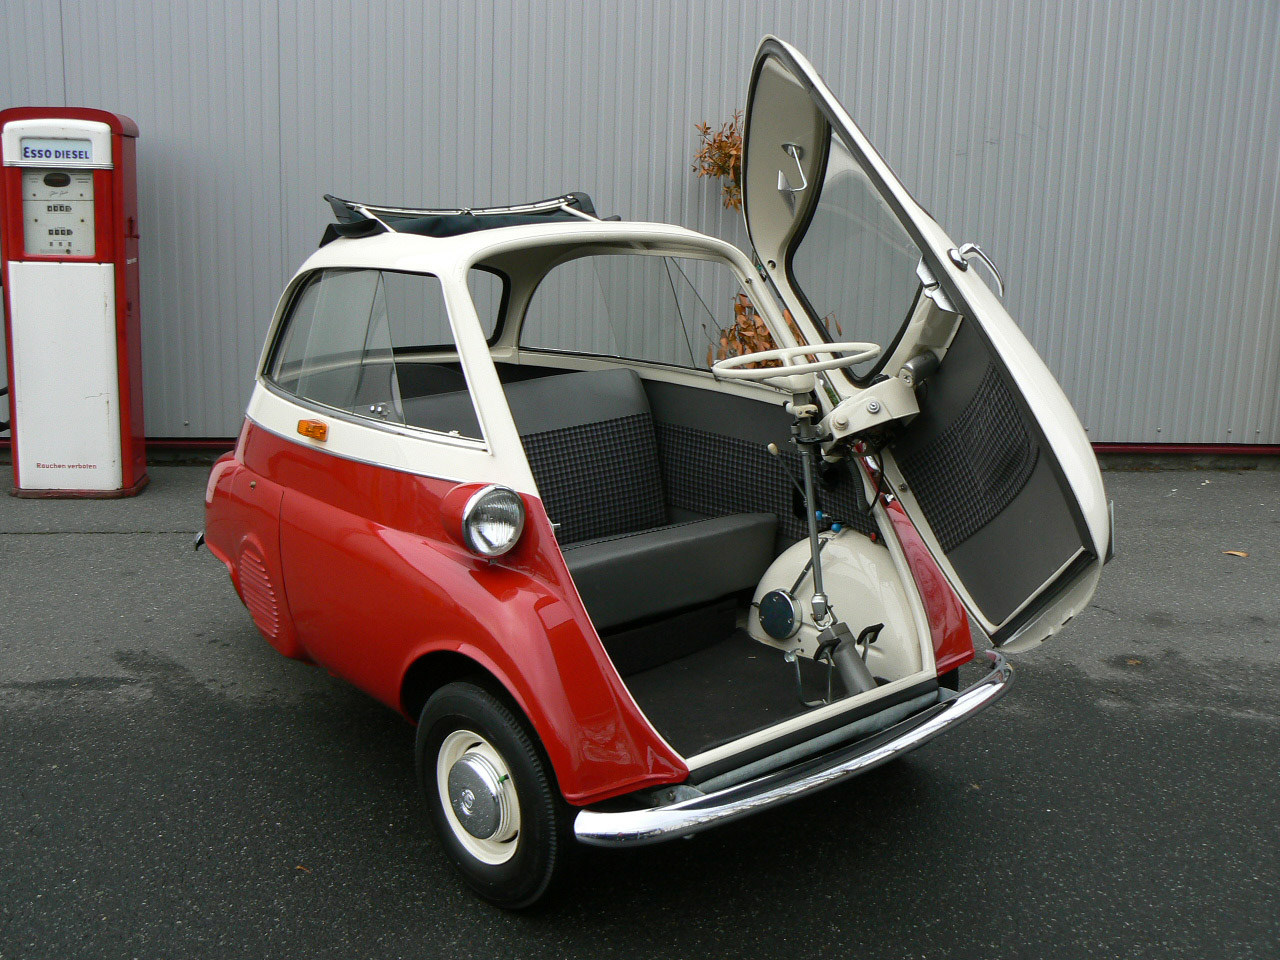 You can vote for this BMW Isetta photo